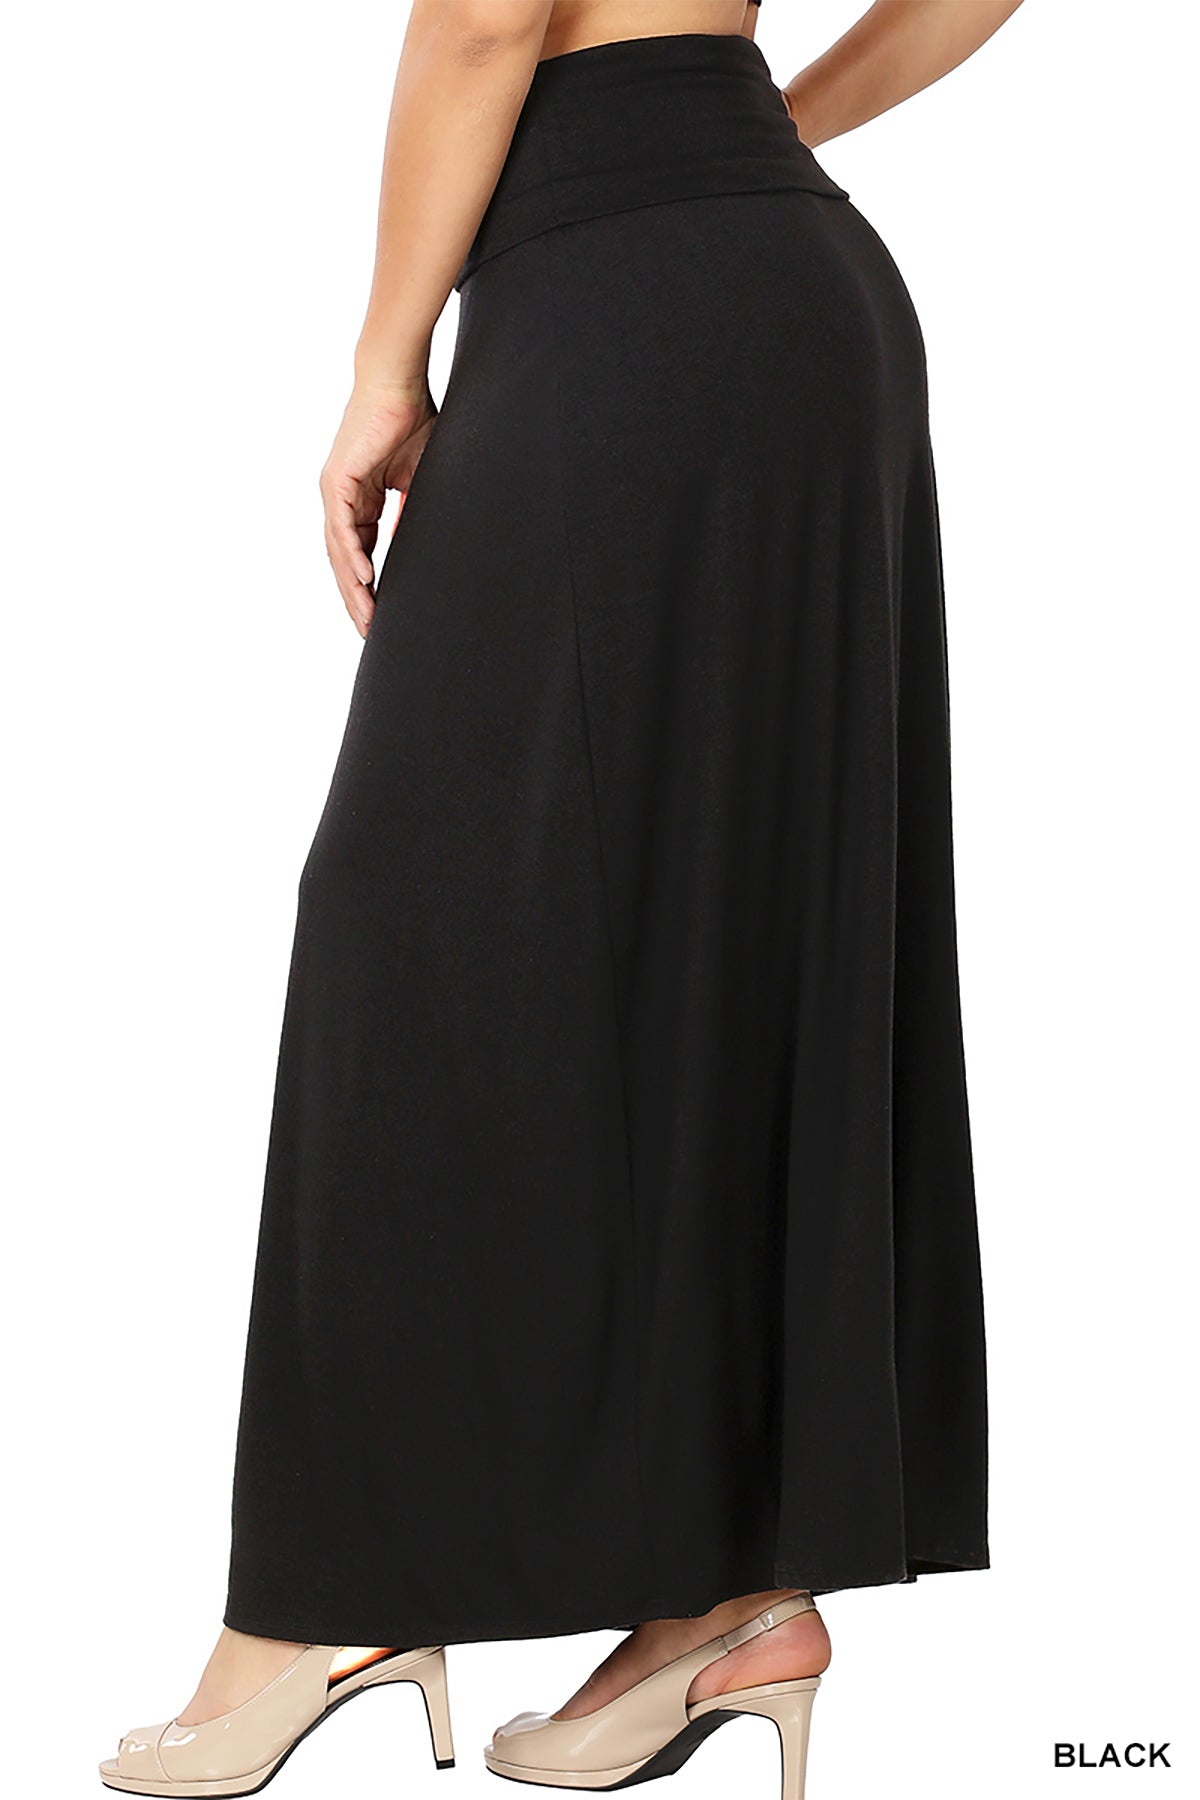 PLUS RELAXED FIT MAXI SKIRT 2-2-2